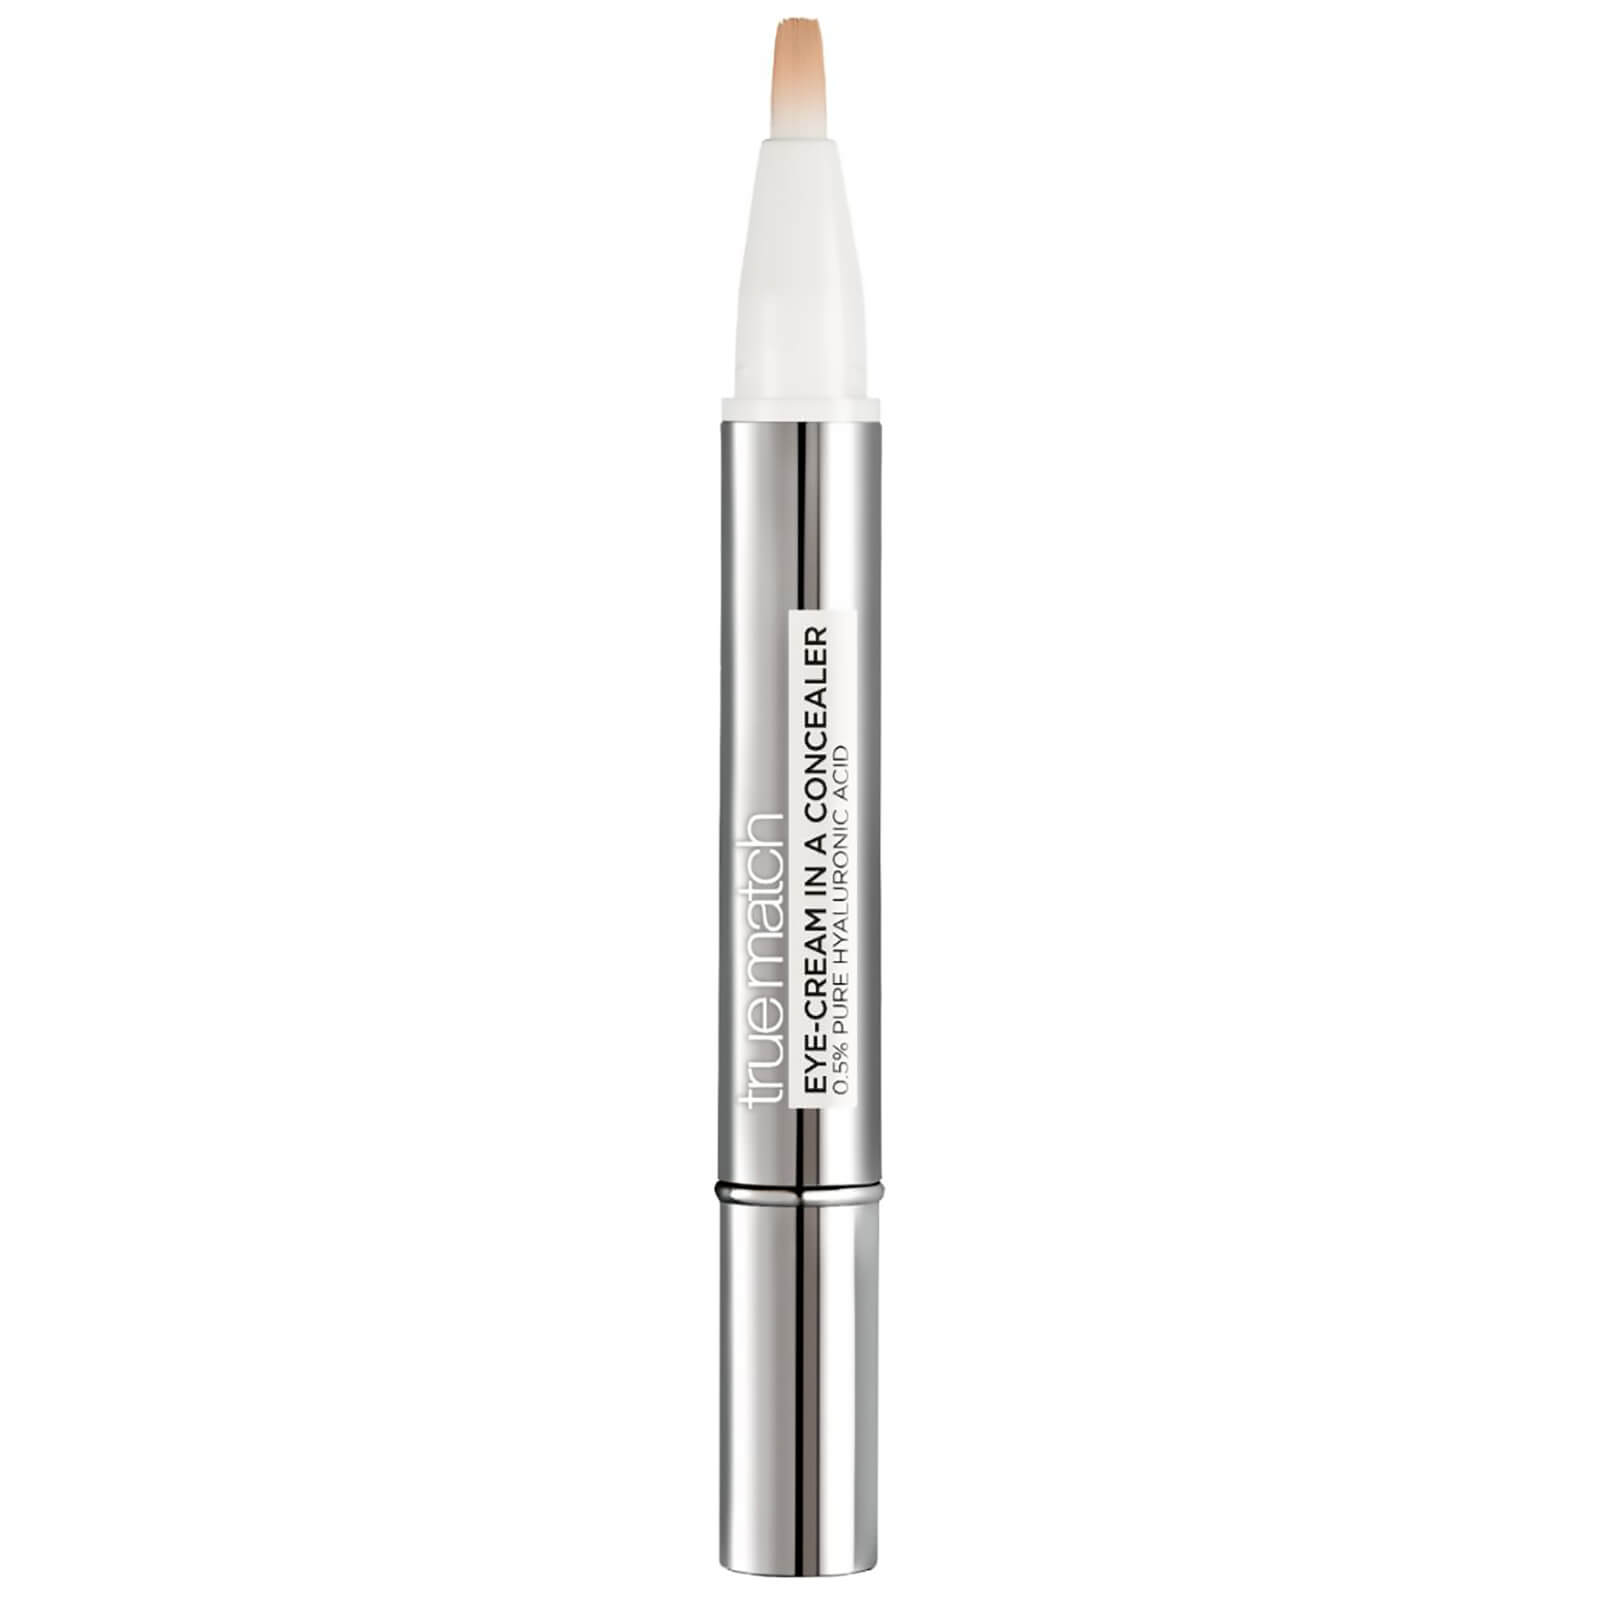 Image of L'Oréal Paris True Match Eye Cream in a Concealer SPF20 (Various Shades) - 5.5-7N Amber